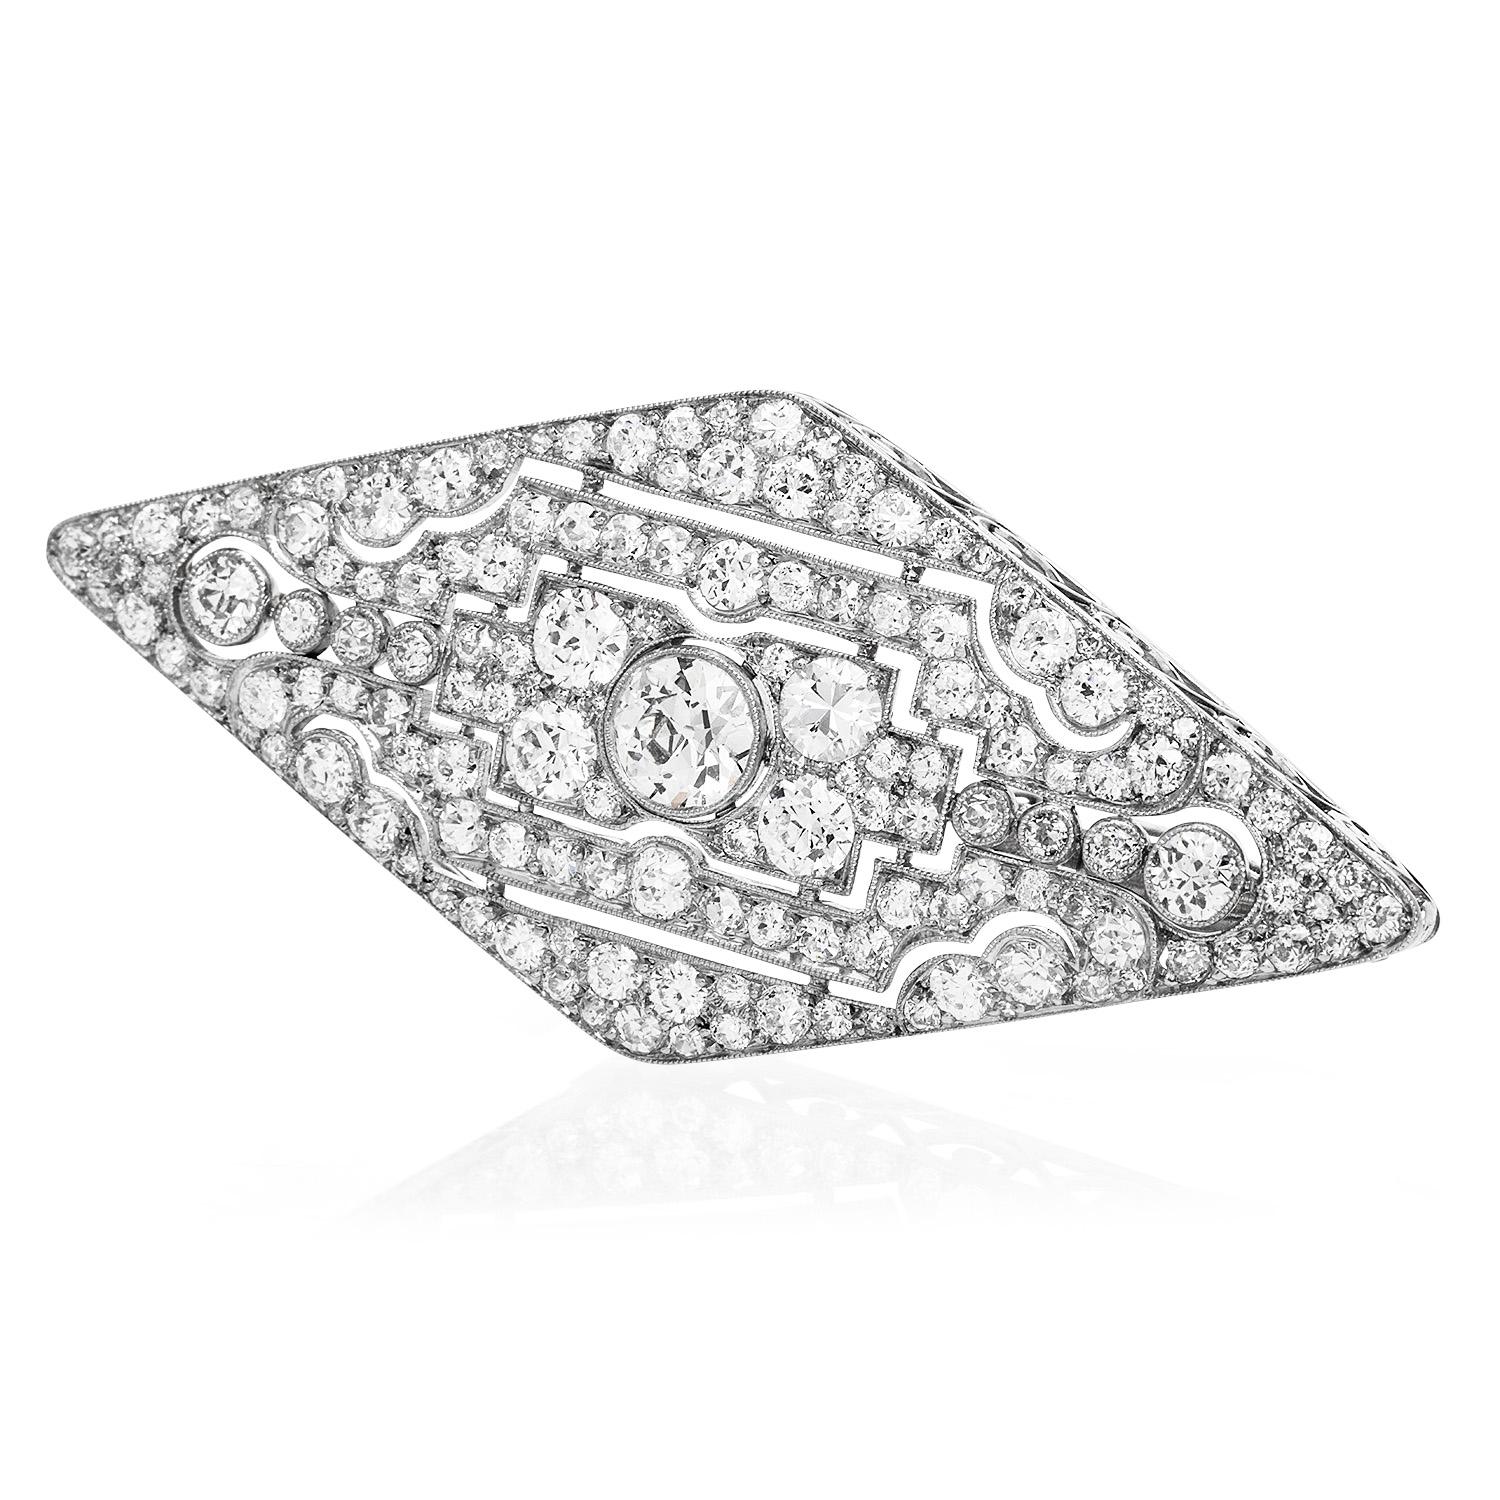 This very fine antique Designer Art deco 1920's diamond Brooch Pin was inspired by a geometric style and crafted in Luxurious Platinum.

Centering an old European-cut round cut diamonds throughout weighing Weighing approx. 1.20 carats, F-G, VS1-VS2